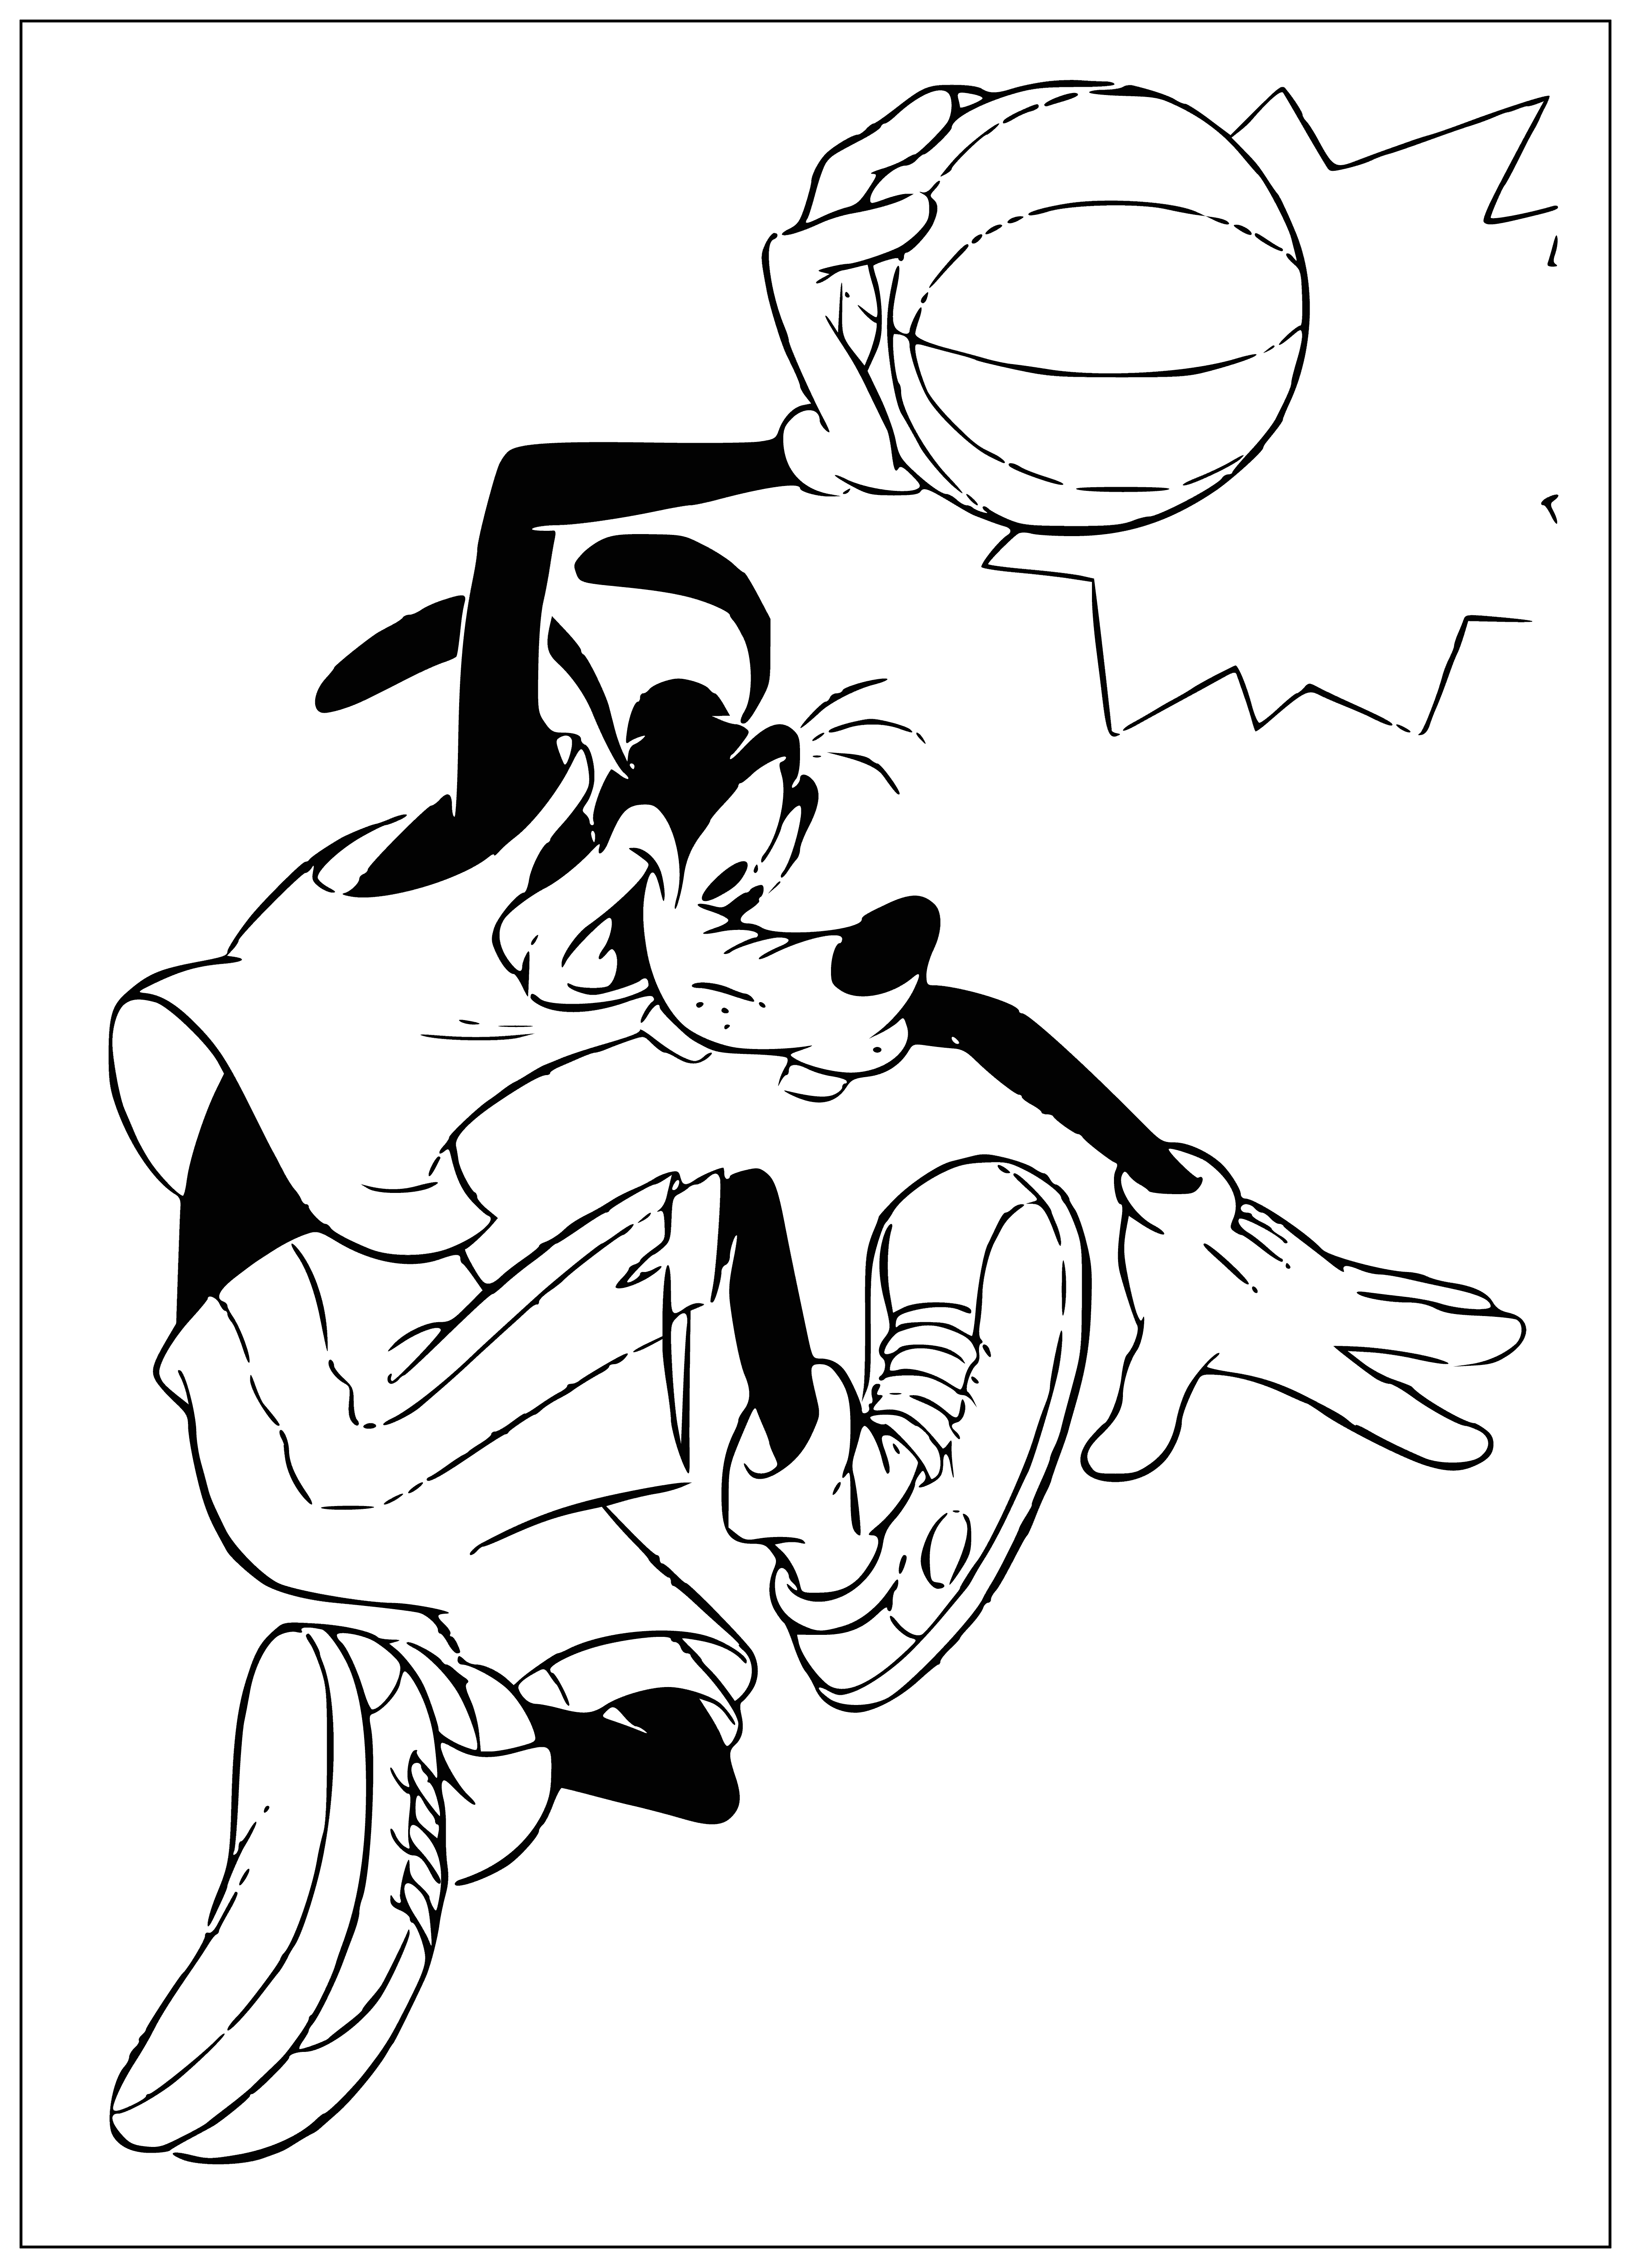 coloring page: Mickey Mouse is playing basketball with a red shirt, blue shorts and red shoes. He has big black ears and a happy smile.